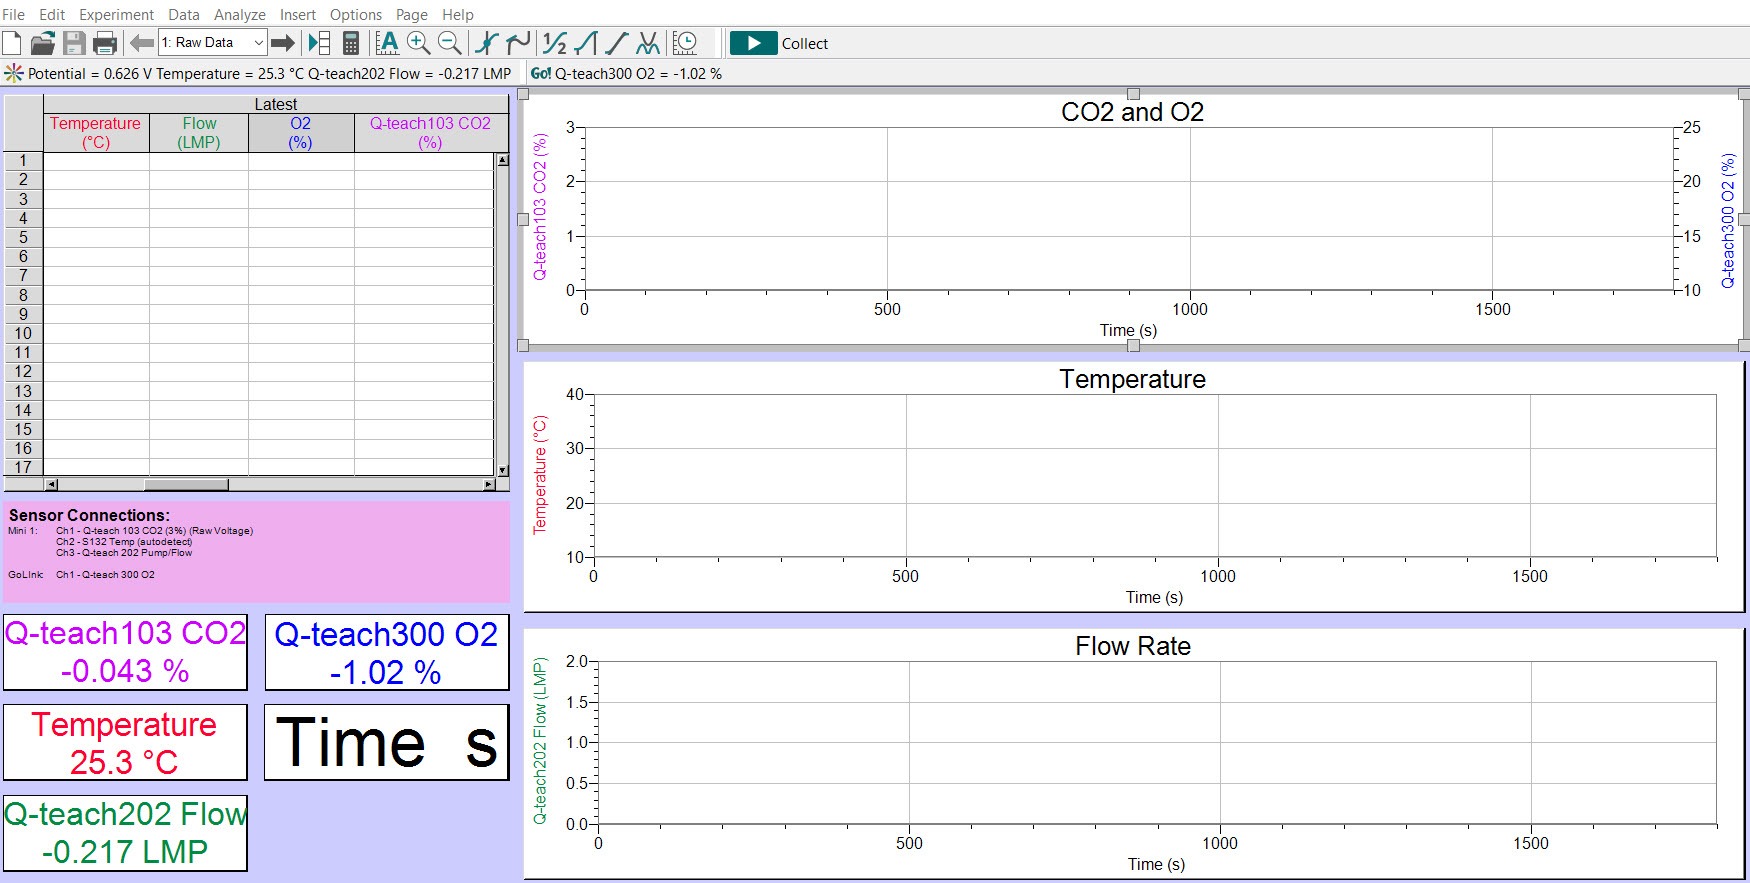 page 1 of raw data for Q-teach animal CO2 and O2 pkg